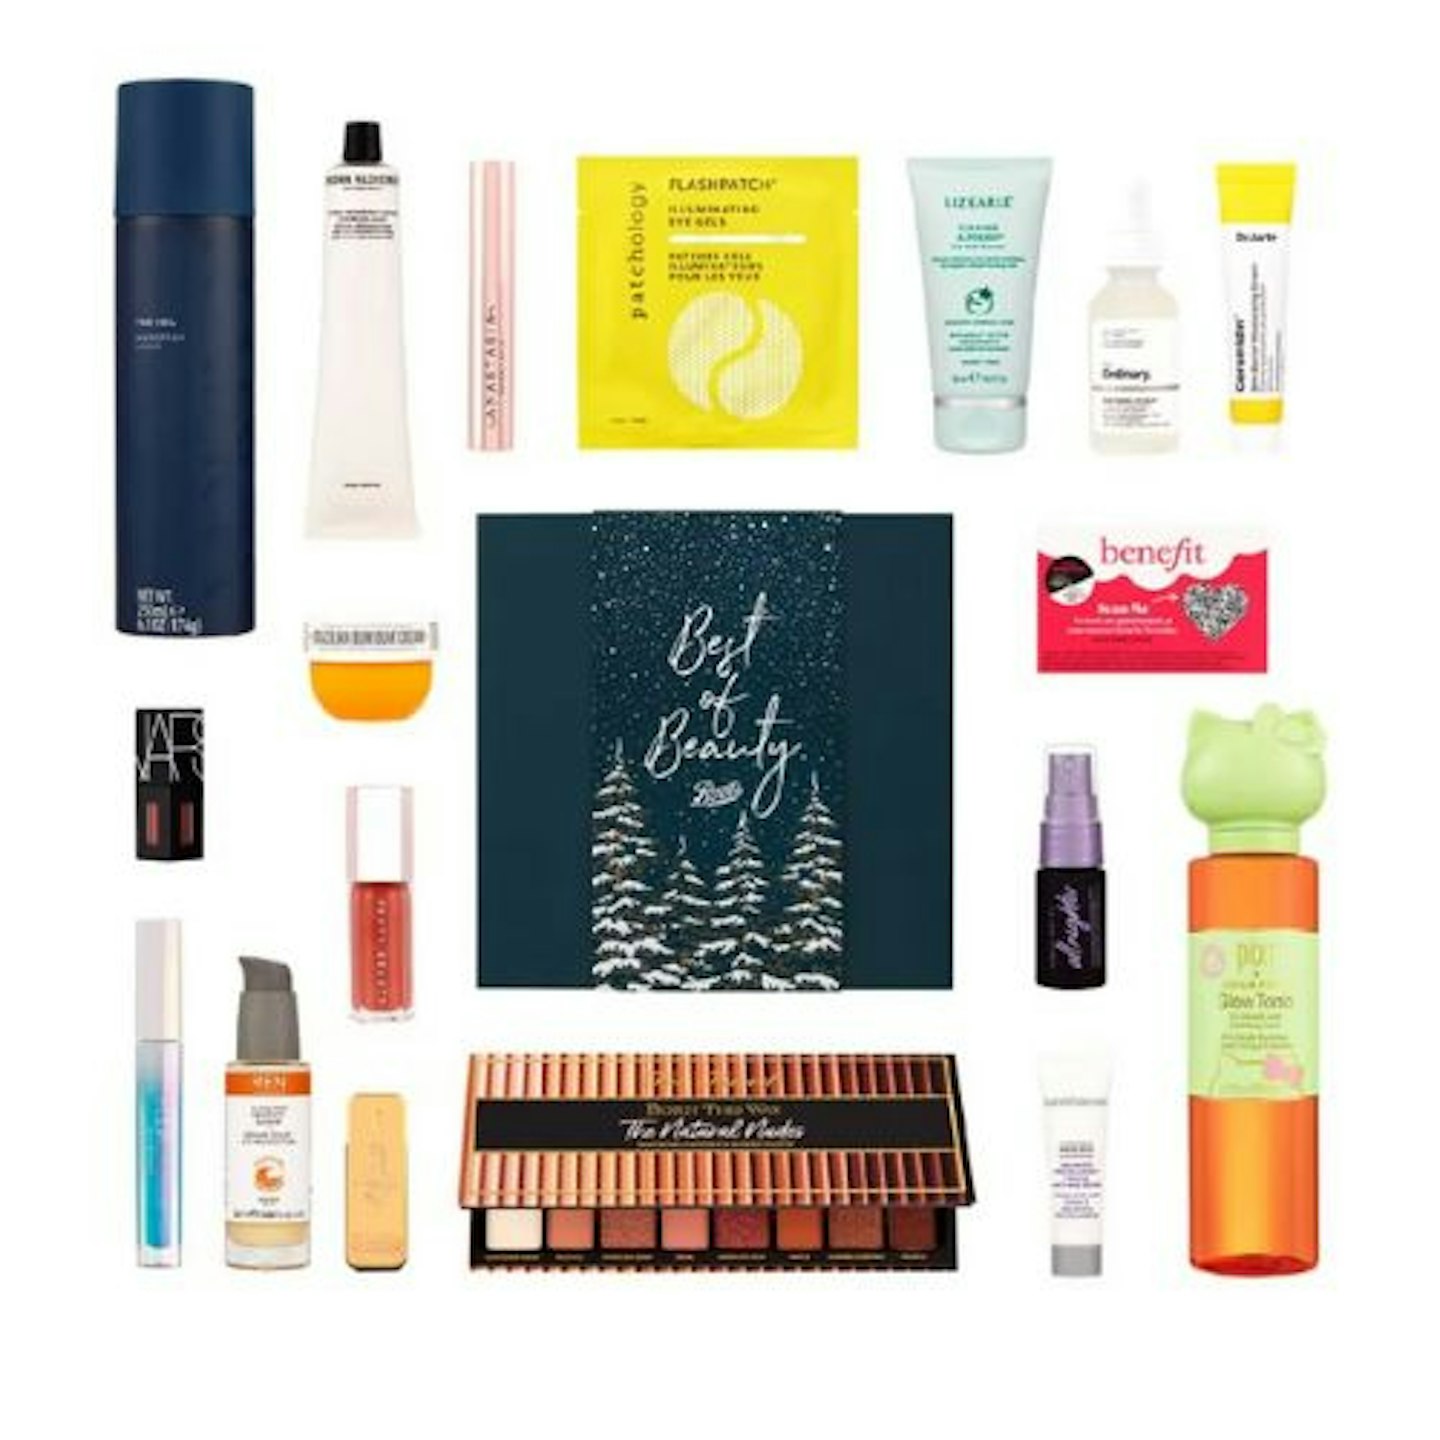 Best of Beauty Christmas Showstopper Beauty Box - Limited Edition